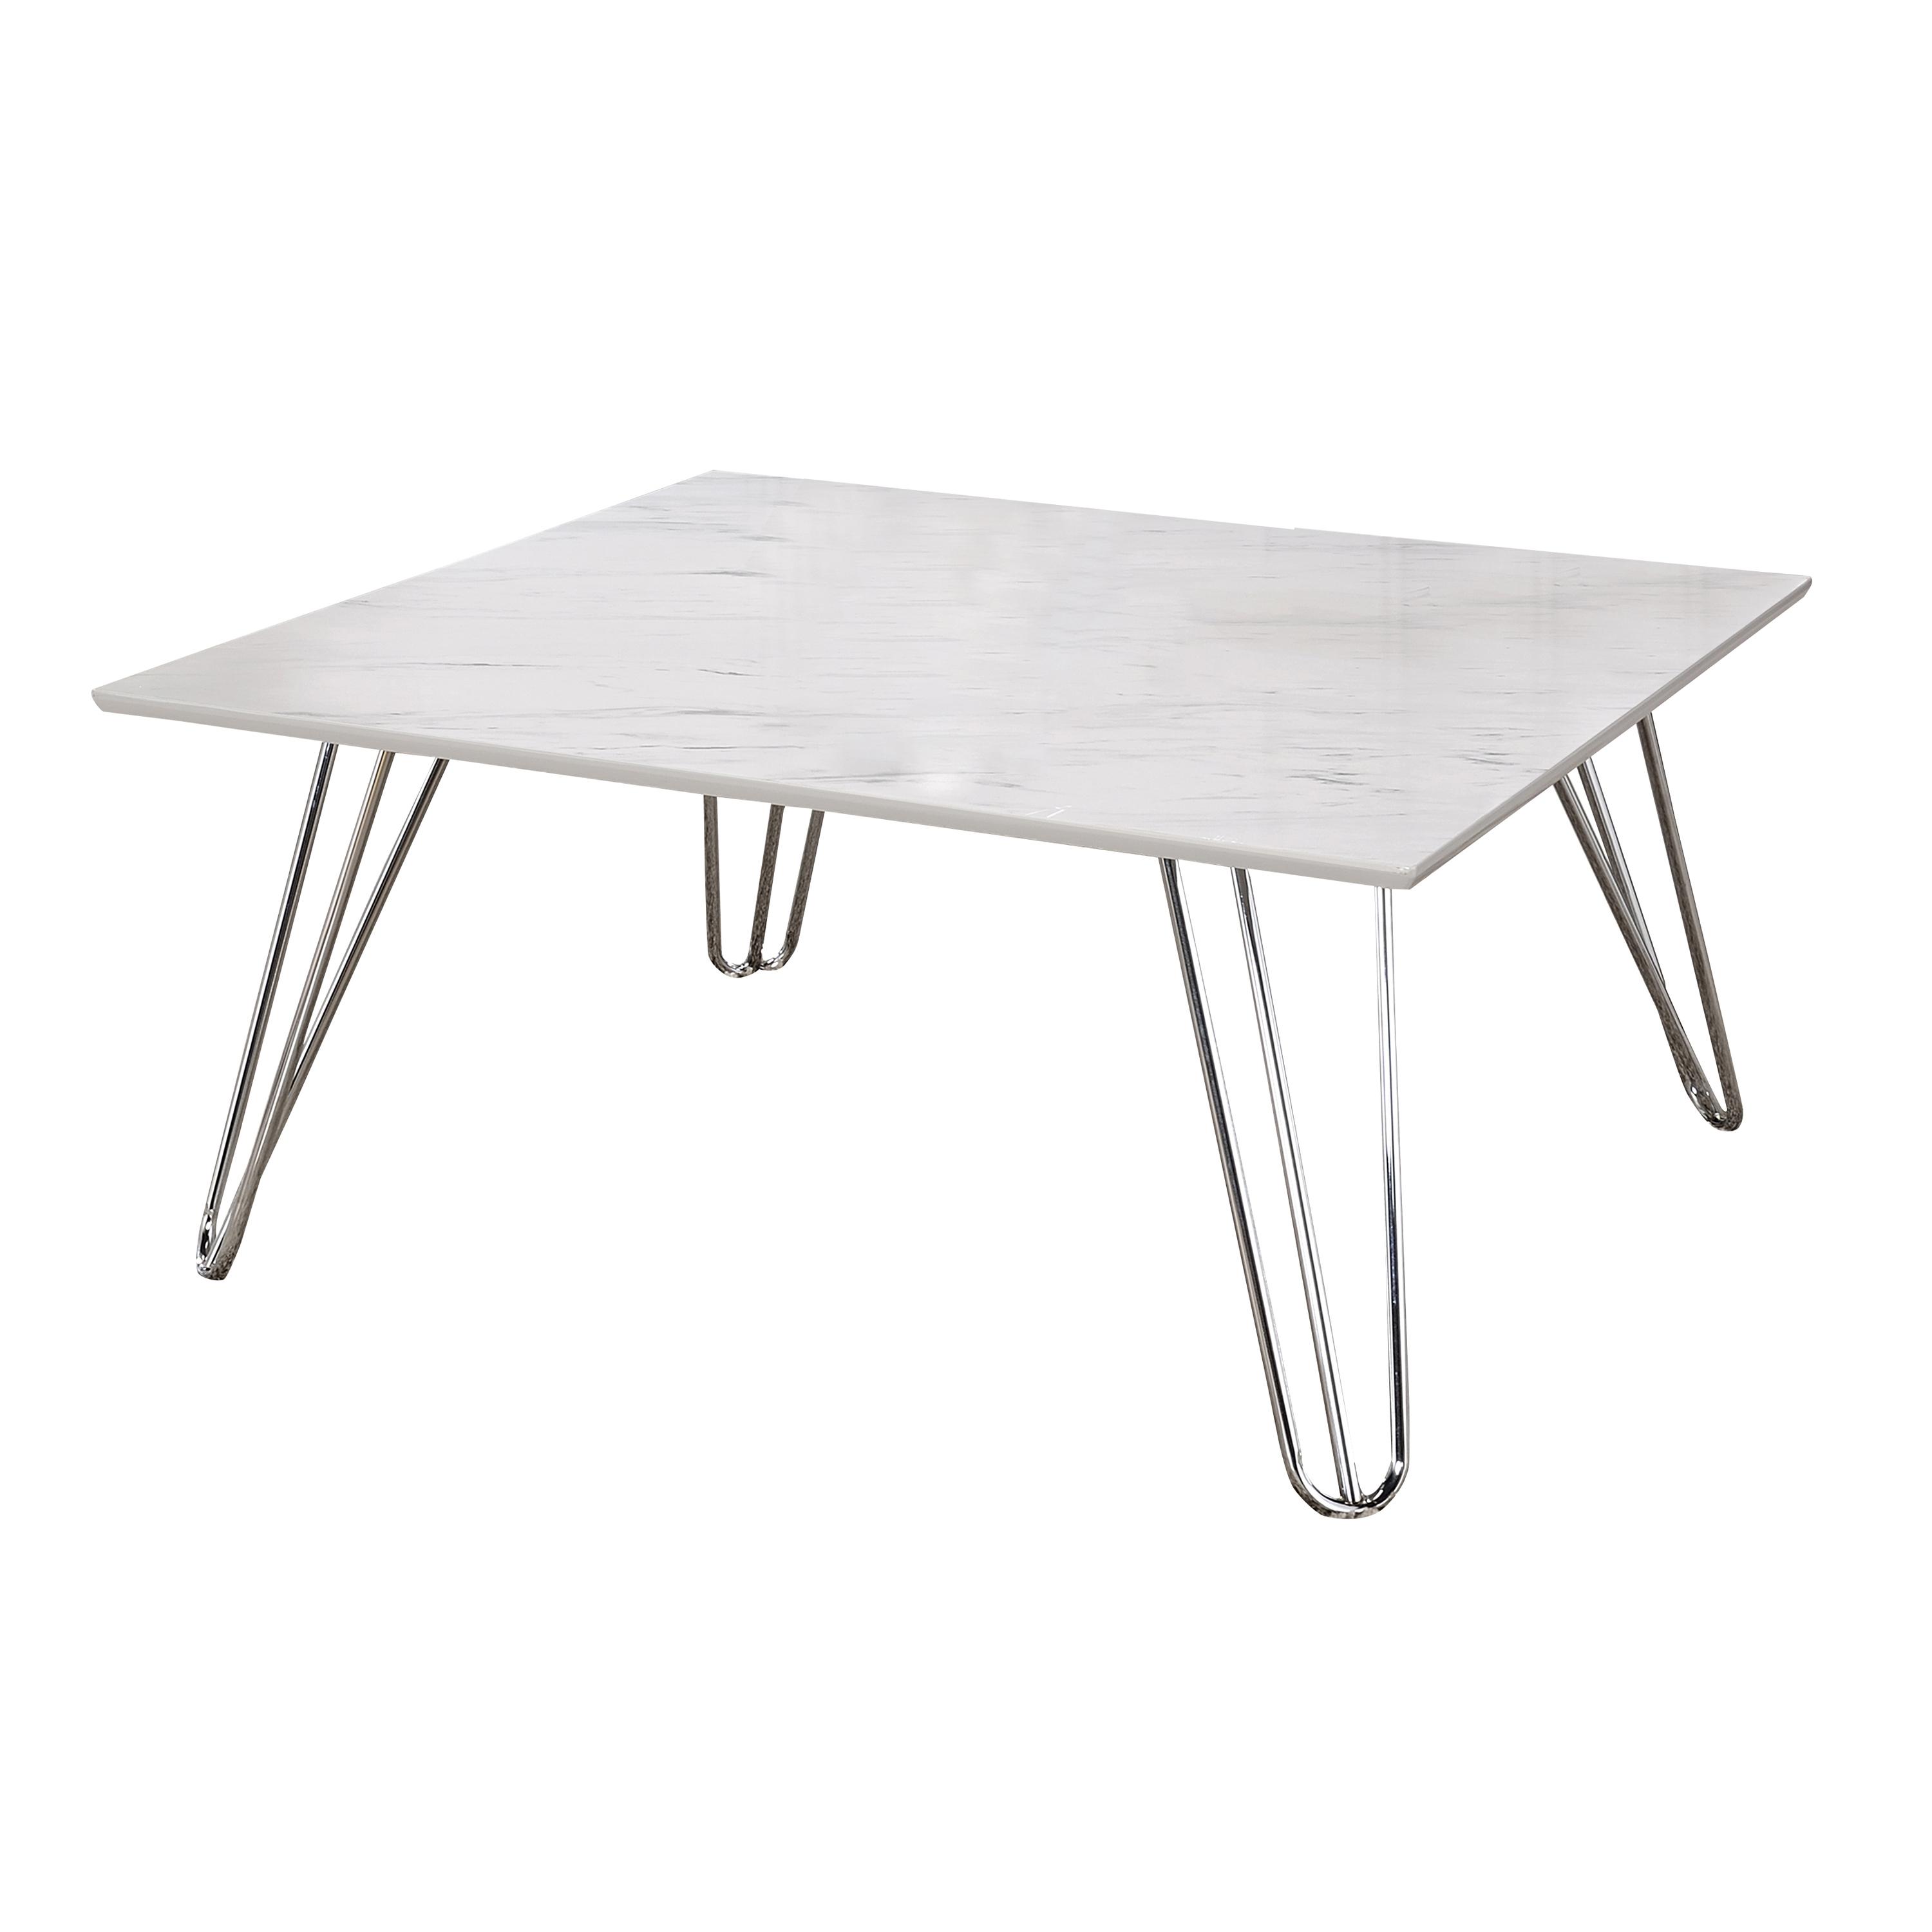 Contemporary Coffee Table 724288 724288 in Chrome, White 